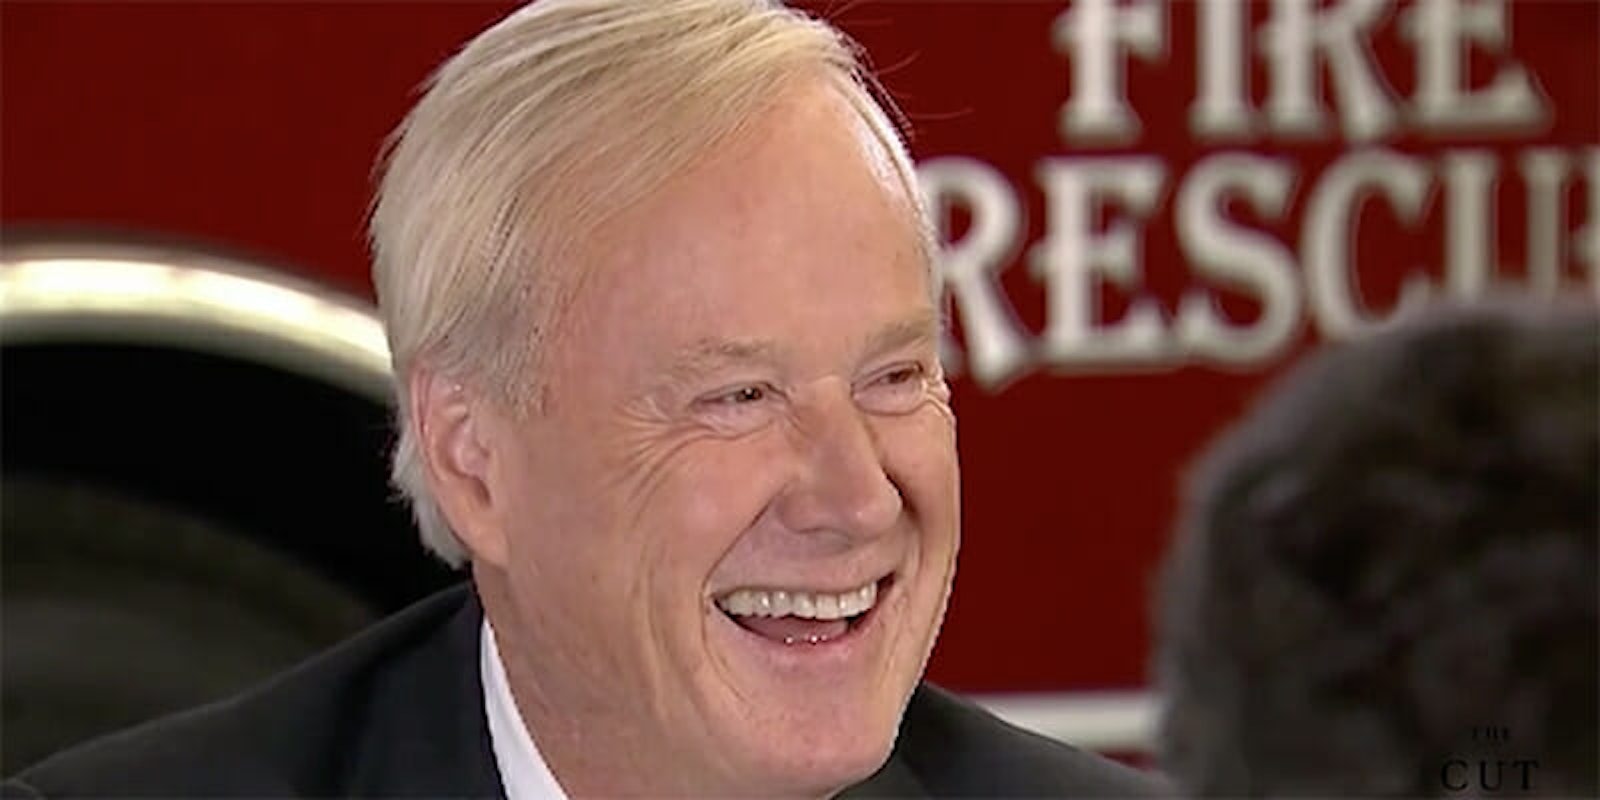 Chris Matthews joked about his 'Bill Cosby pill' before a 2016 interview with Hillary Clinton.